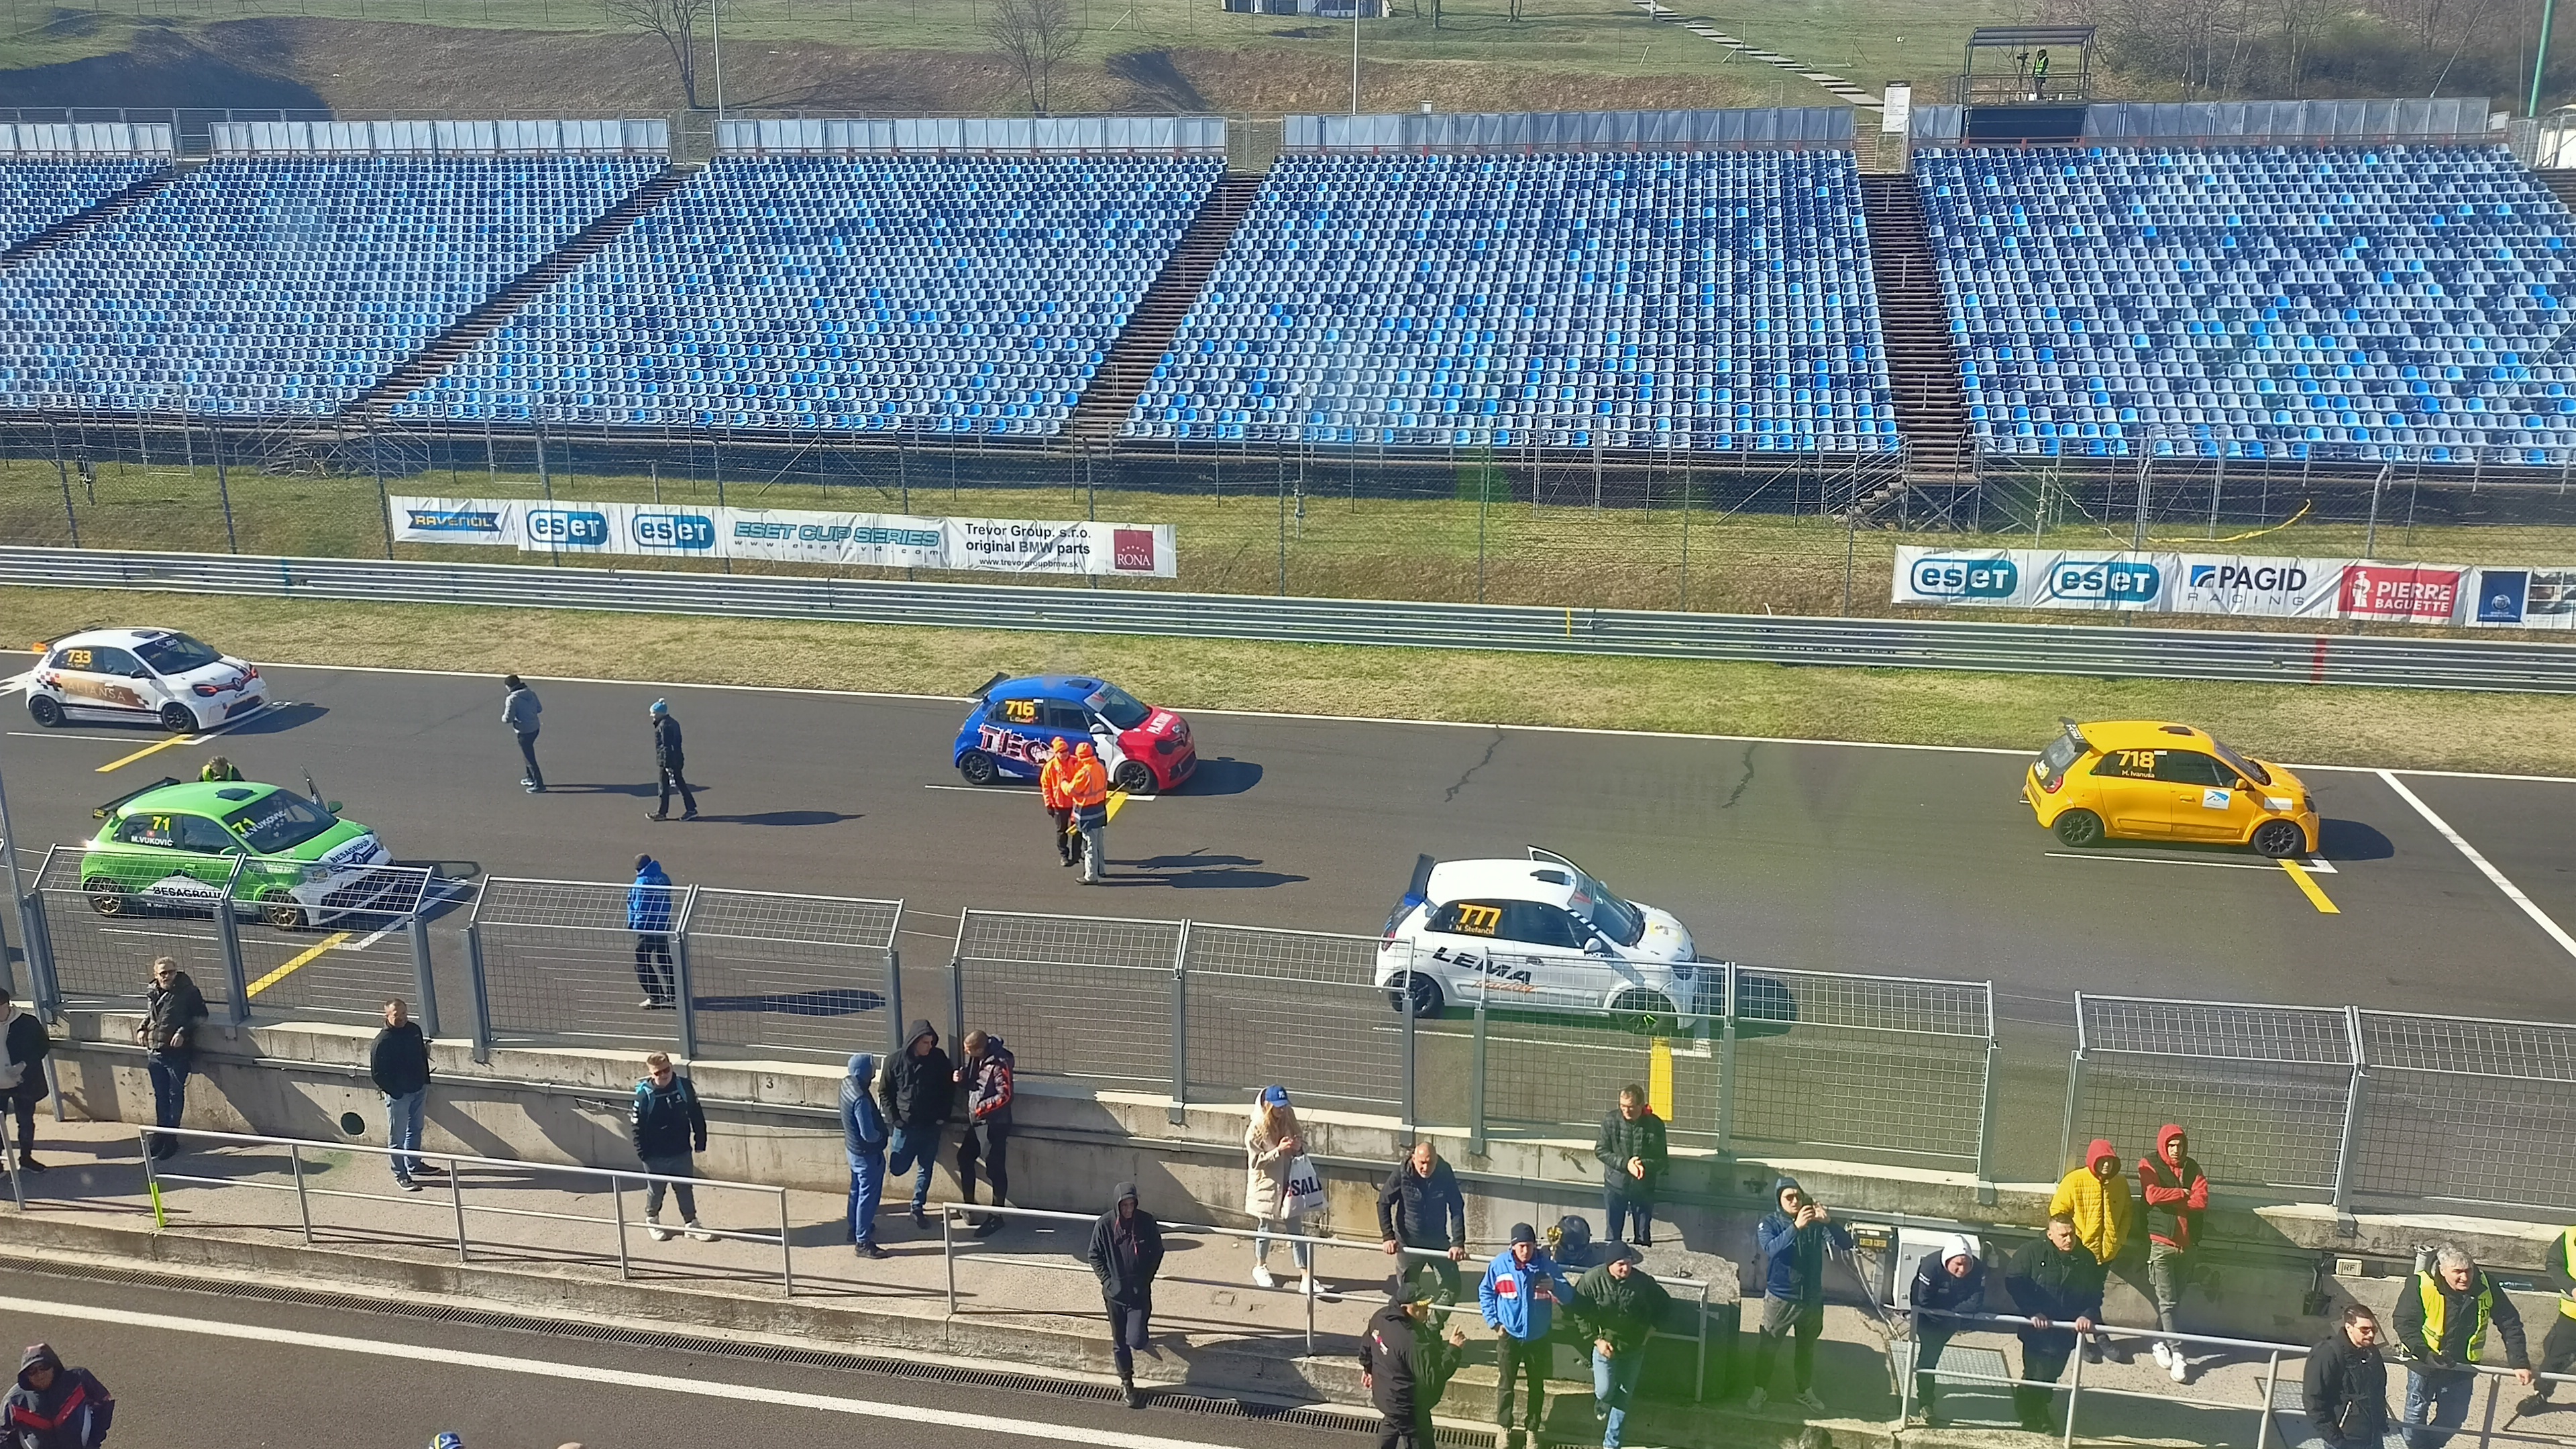 Matej Ivanuša won the second race of the Twingo Cup behind the safety car